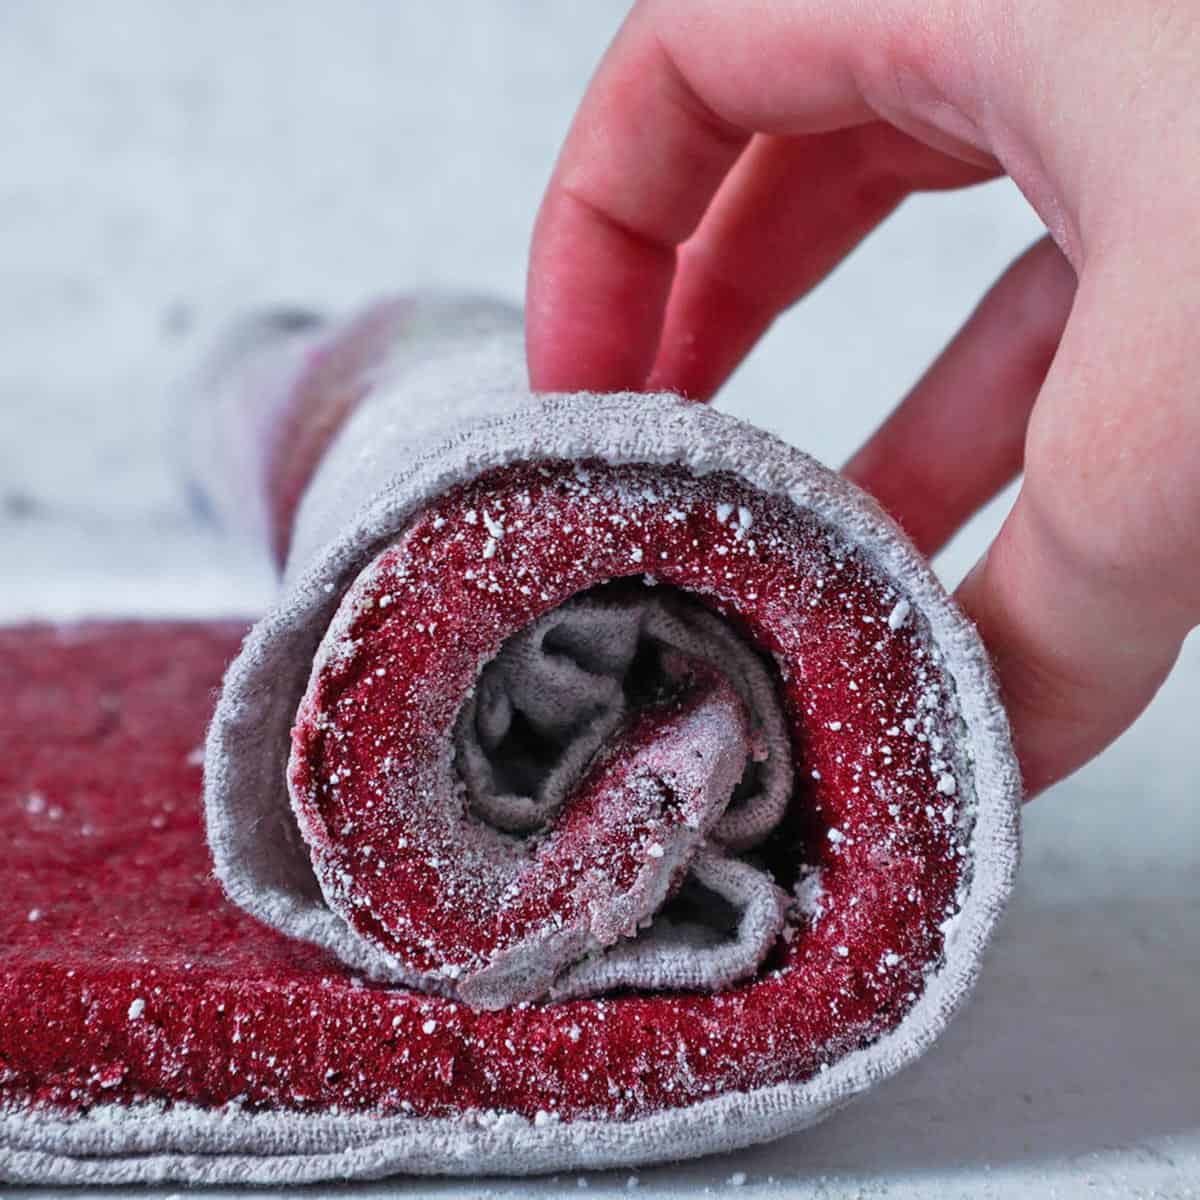 Rolling a red velvet cake in a clean kitchen towel with powdered sugar.